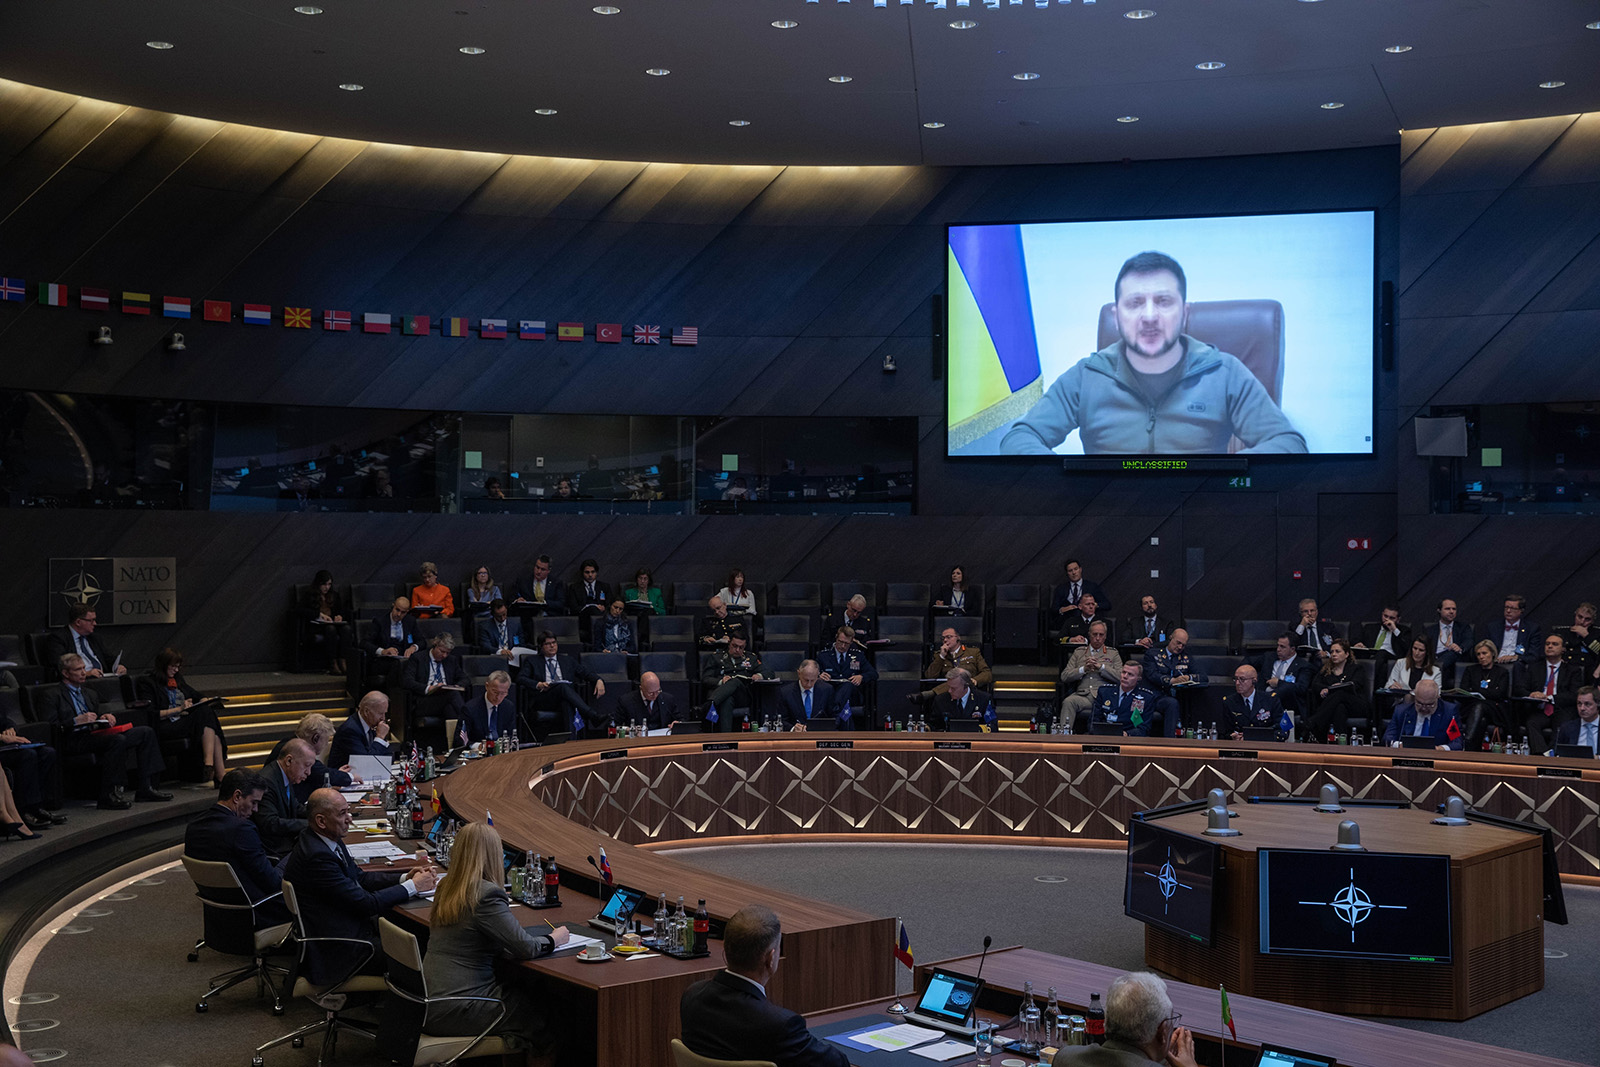 Ukrainian President Volodymyr Zelensky addresses via video link a meeting of the Extraordinary Summit of NATO Heads of State and Government held in Brussels, Belgium, on March 24.